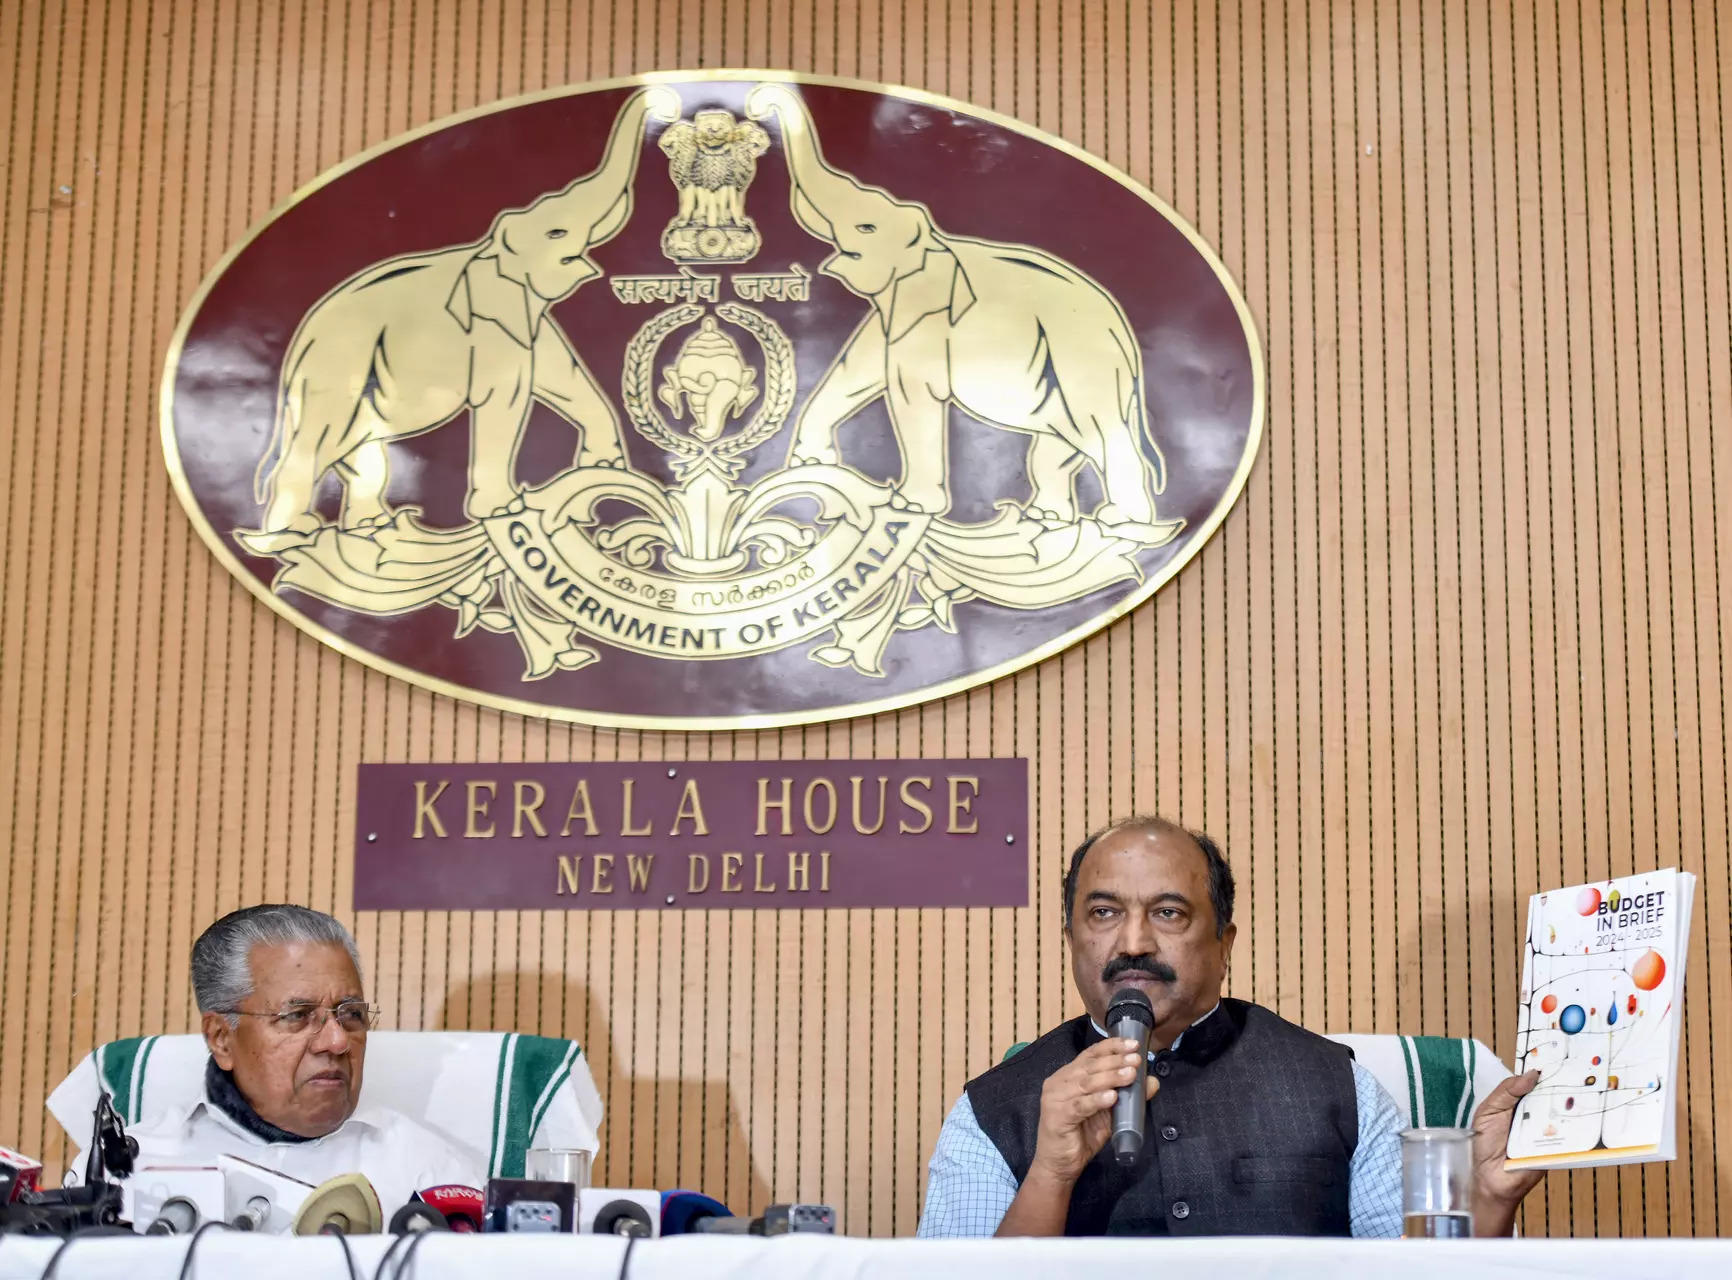 Kerala's spending increased by 30-35 per cent despite Centre's restrictions: Minister Balagopal 